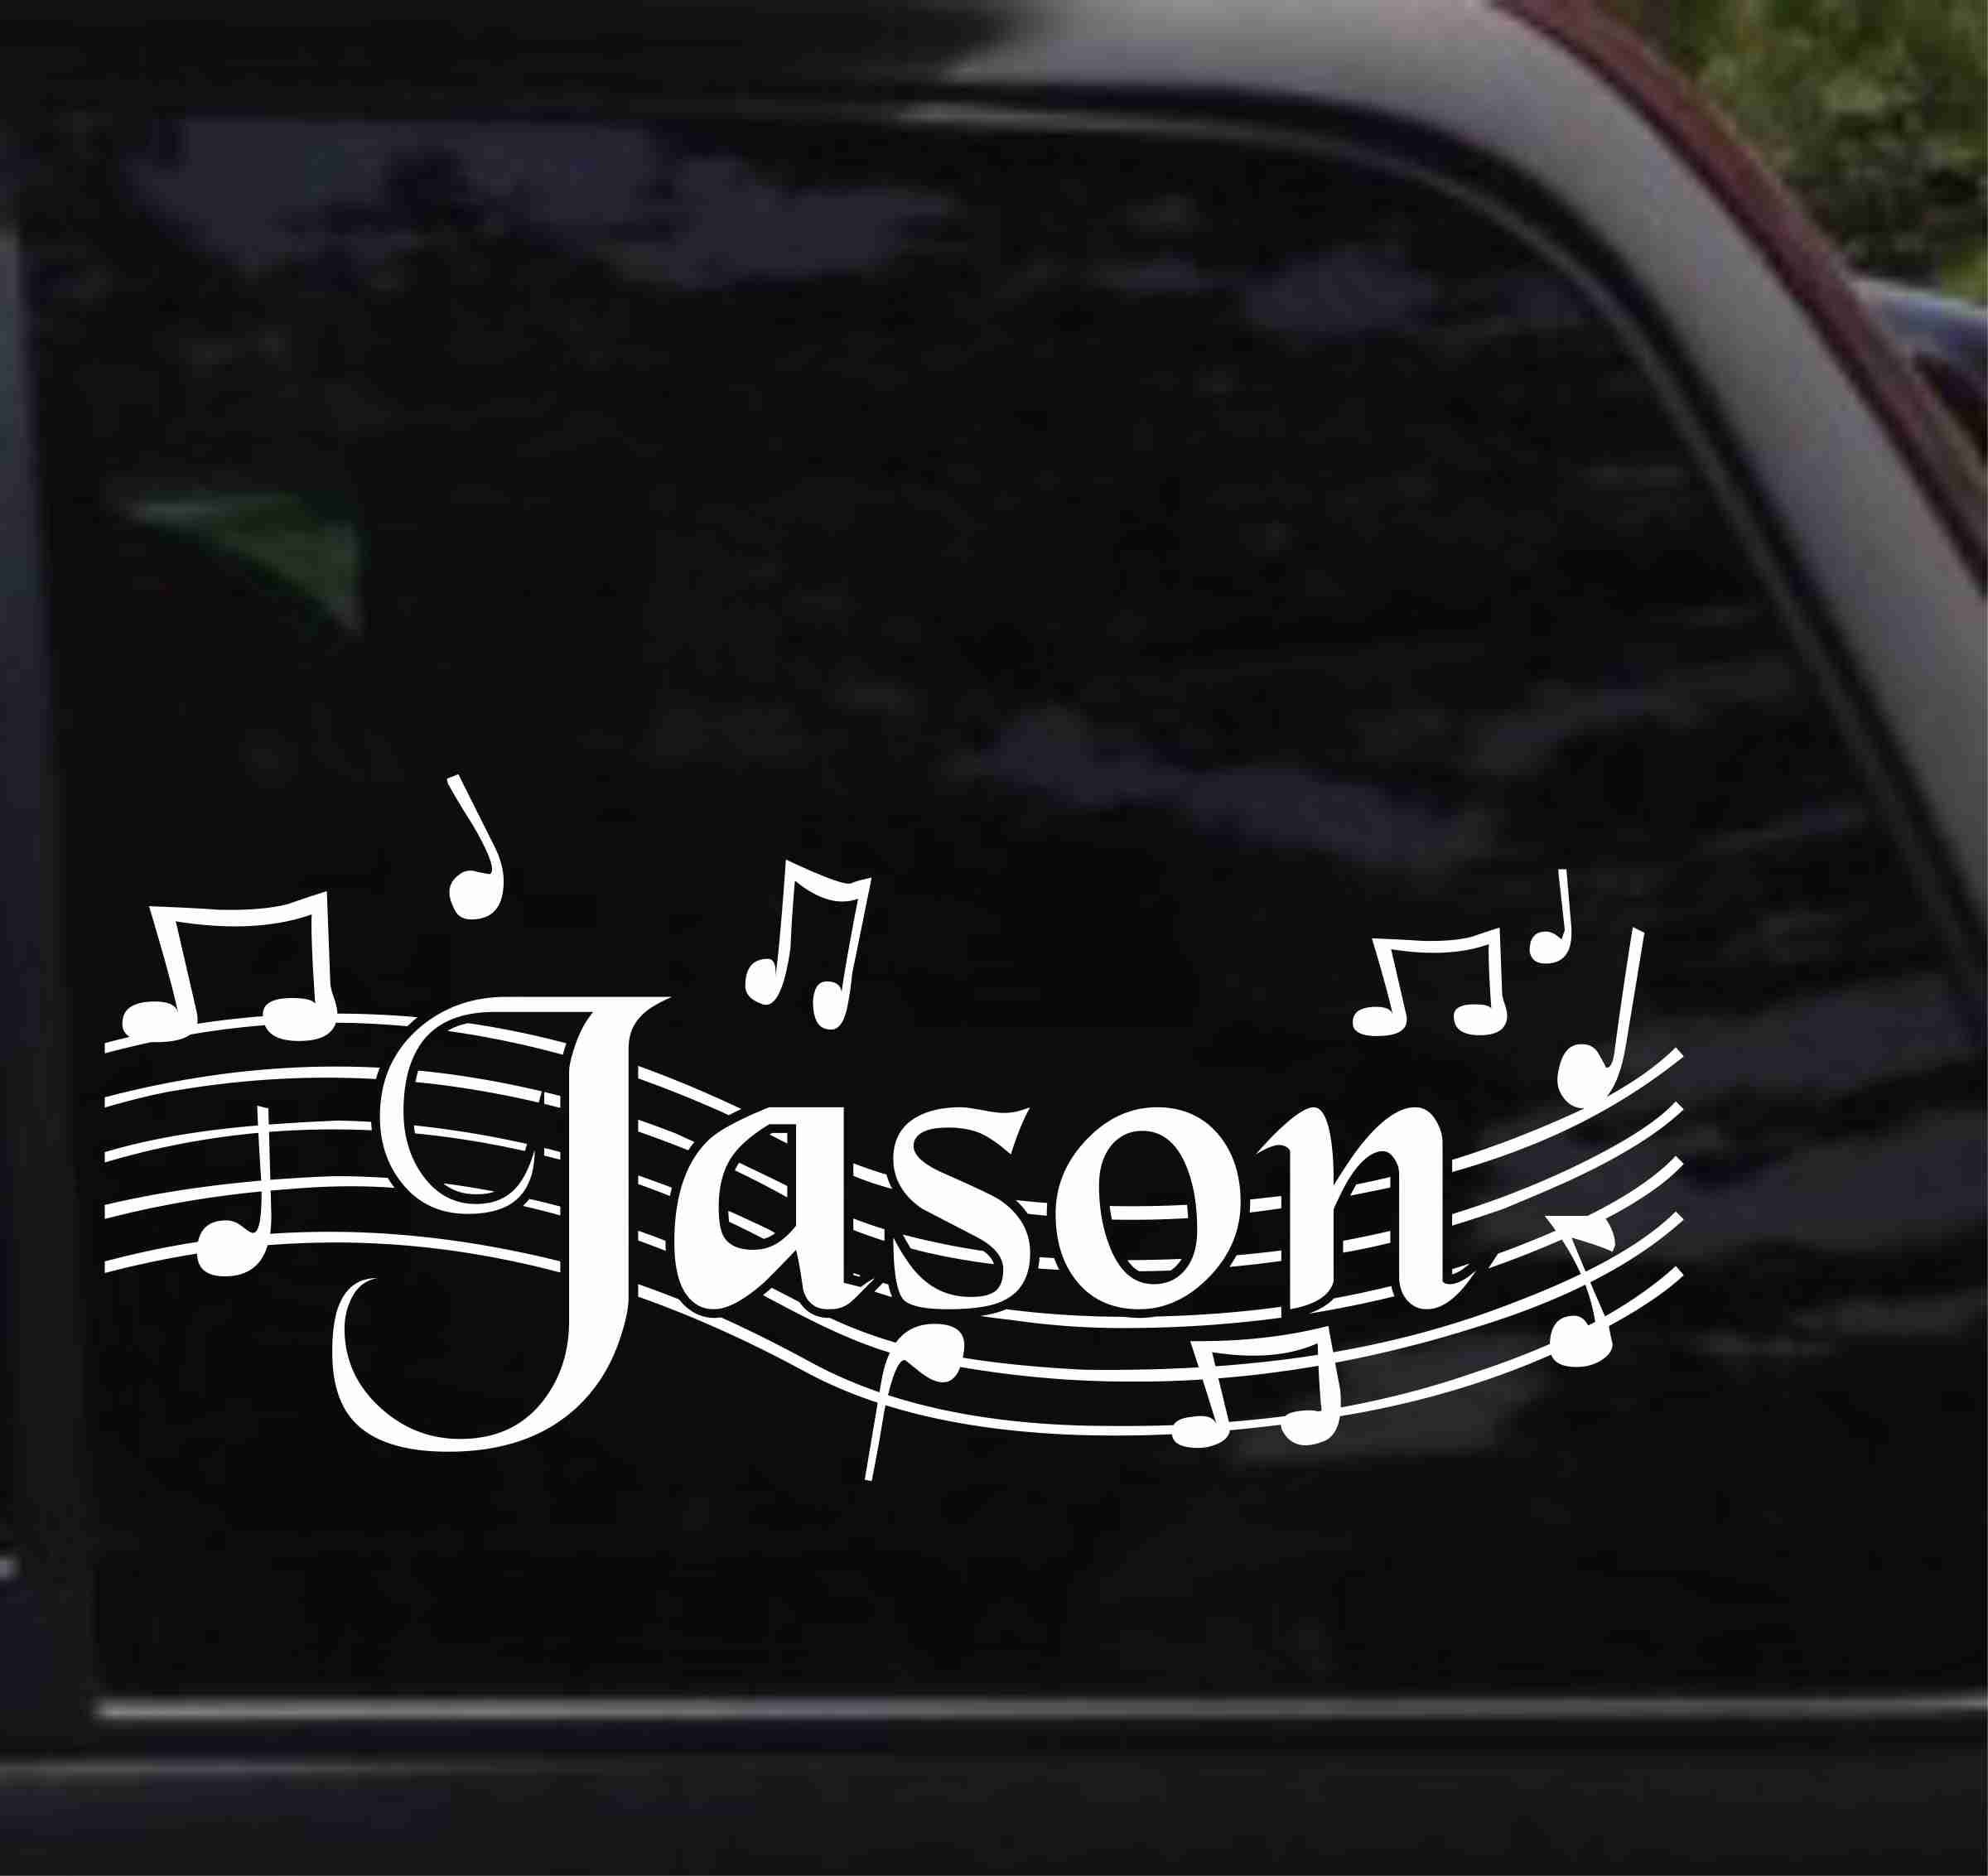 SET FOR 2 SIDES, Car Decal, Notes Decal, Music Decal for Car